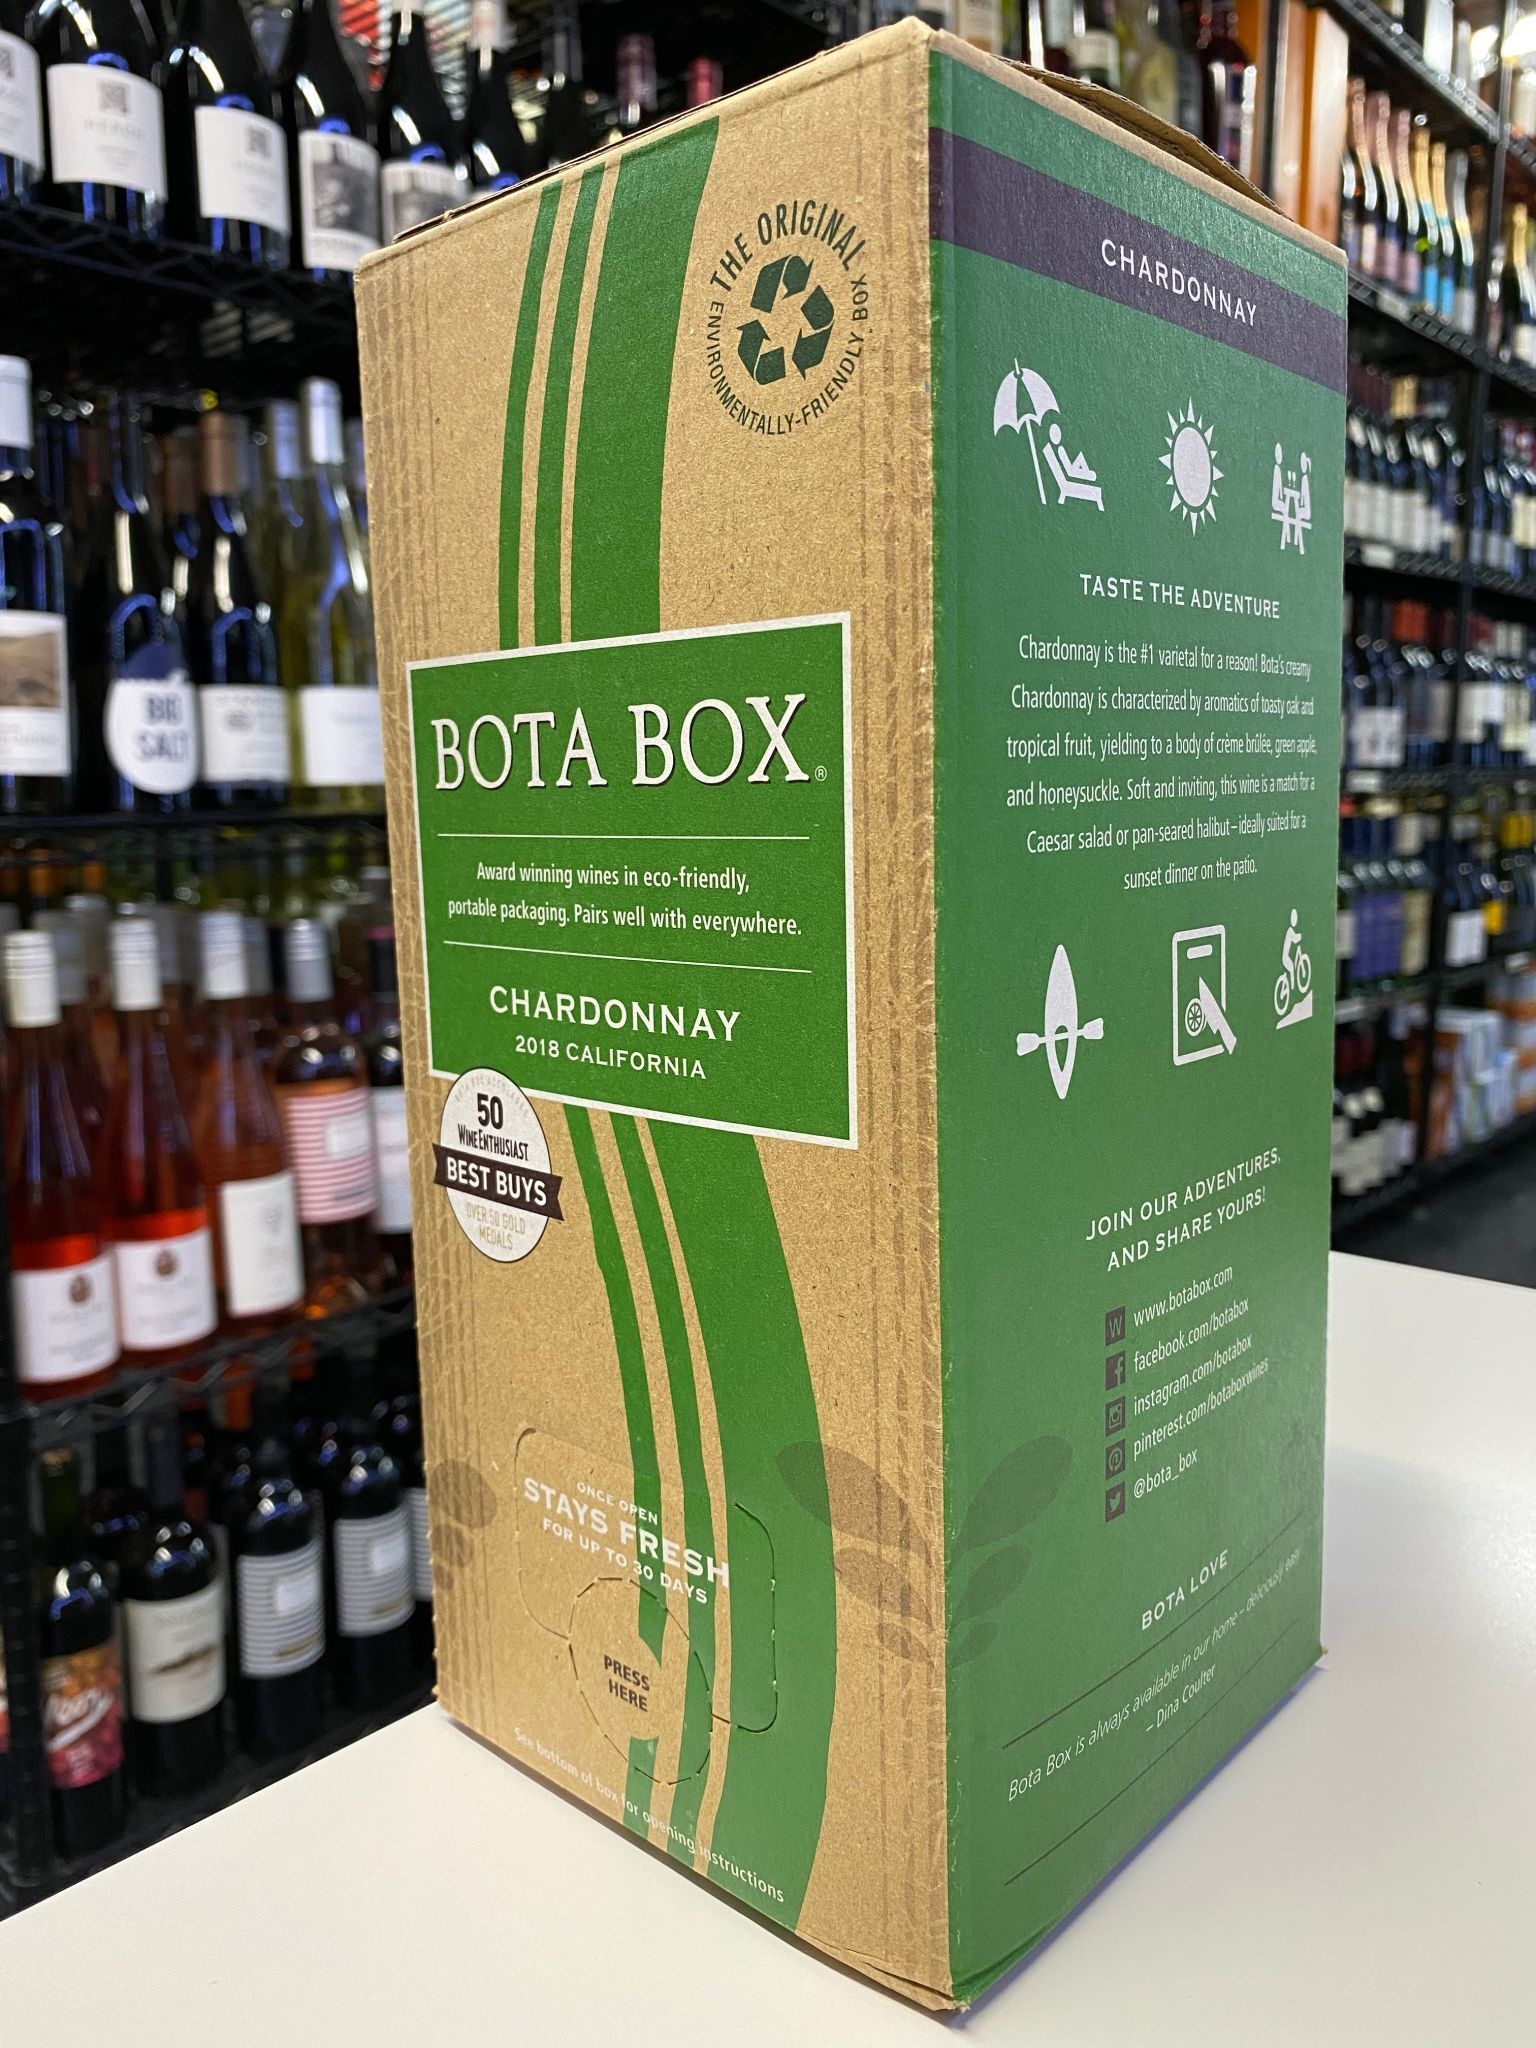 45-boxed-wines-ranked-from-best-to-worst